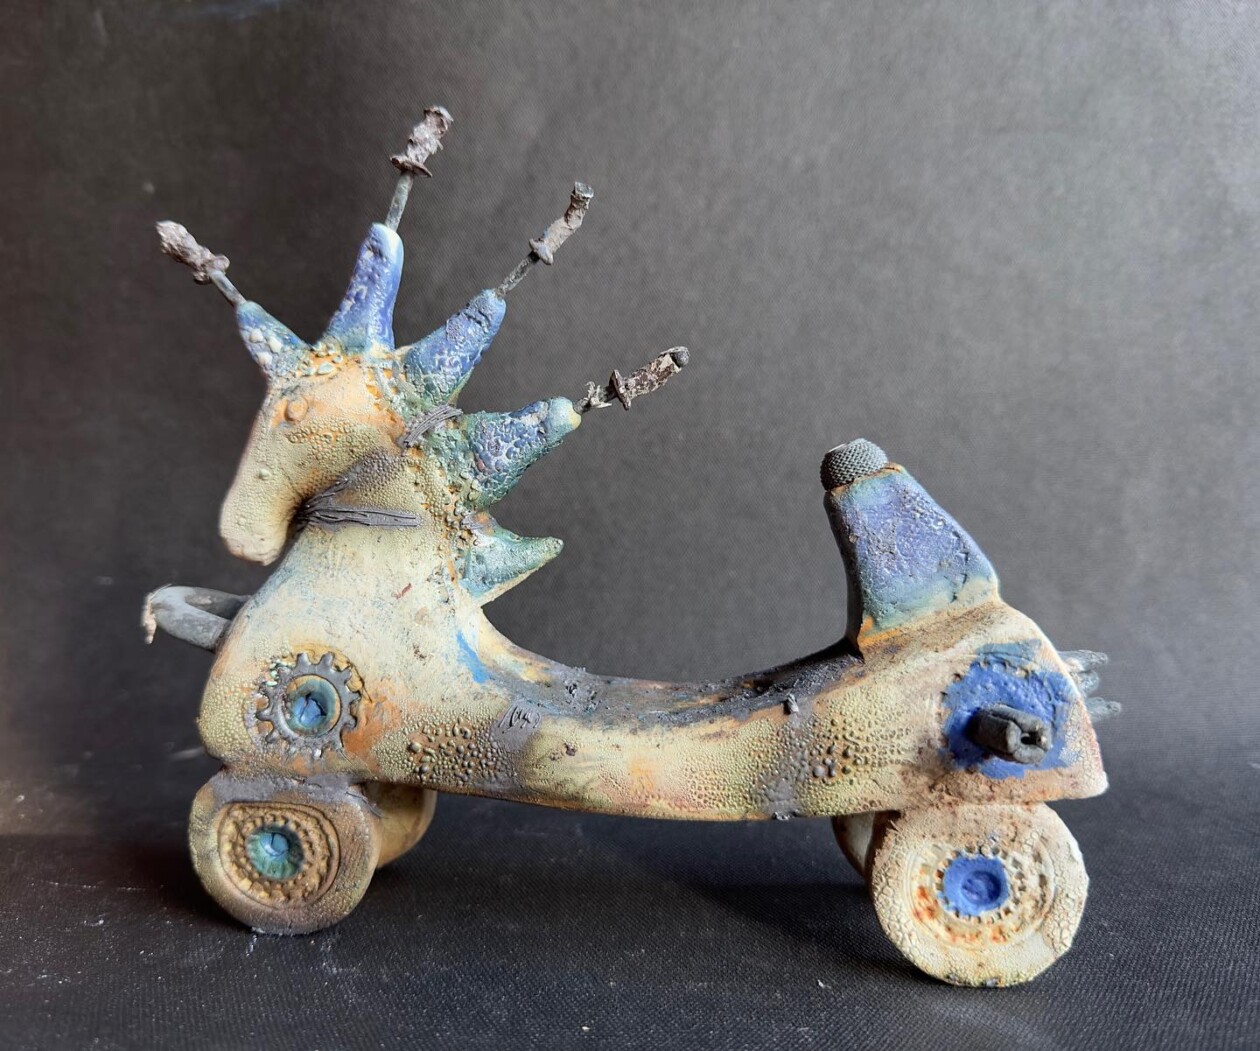 Fascinating Animal Ceramic Sculptures That Look Like Ancient Artifacts By Gul Sahin (5)